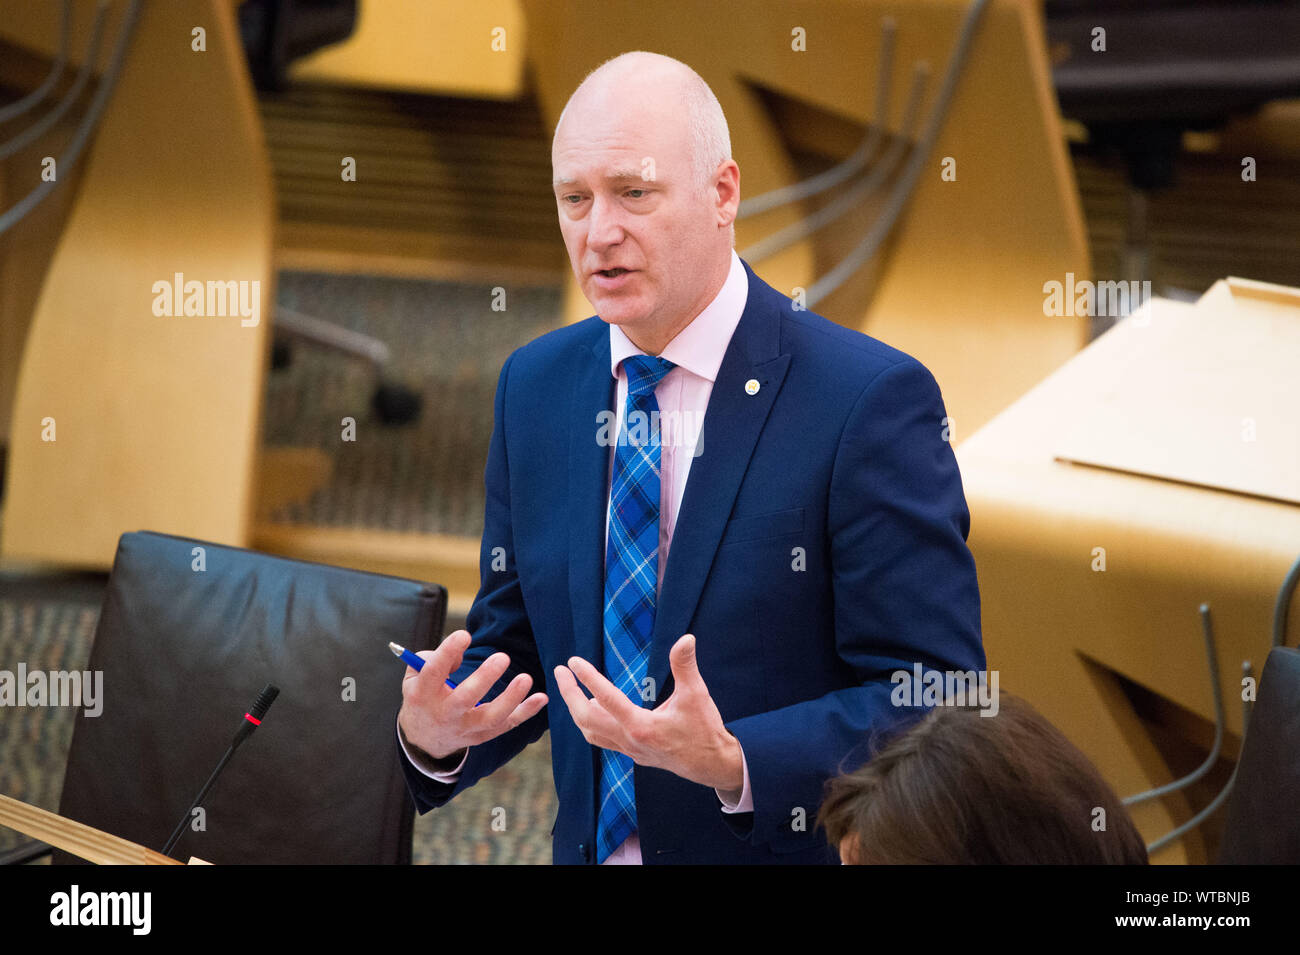 Edinburgh, UK. 5 September 2019. Pictured: Joe Fitzpatrick MSP - Minister for Public Health, Sport & Wellbeing.  Ministerial Statement from Joe Fitzpatrick MSP: 'Tackling Drug Related Deaths'.  Scotland is facing a public health emergency. The latest figures from National Records of Scotland show that 1,187 people lost their lives in 2018 as a result of drug use. Colin Fisher/CDFIMAGES.COM Stock Photo